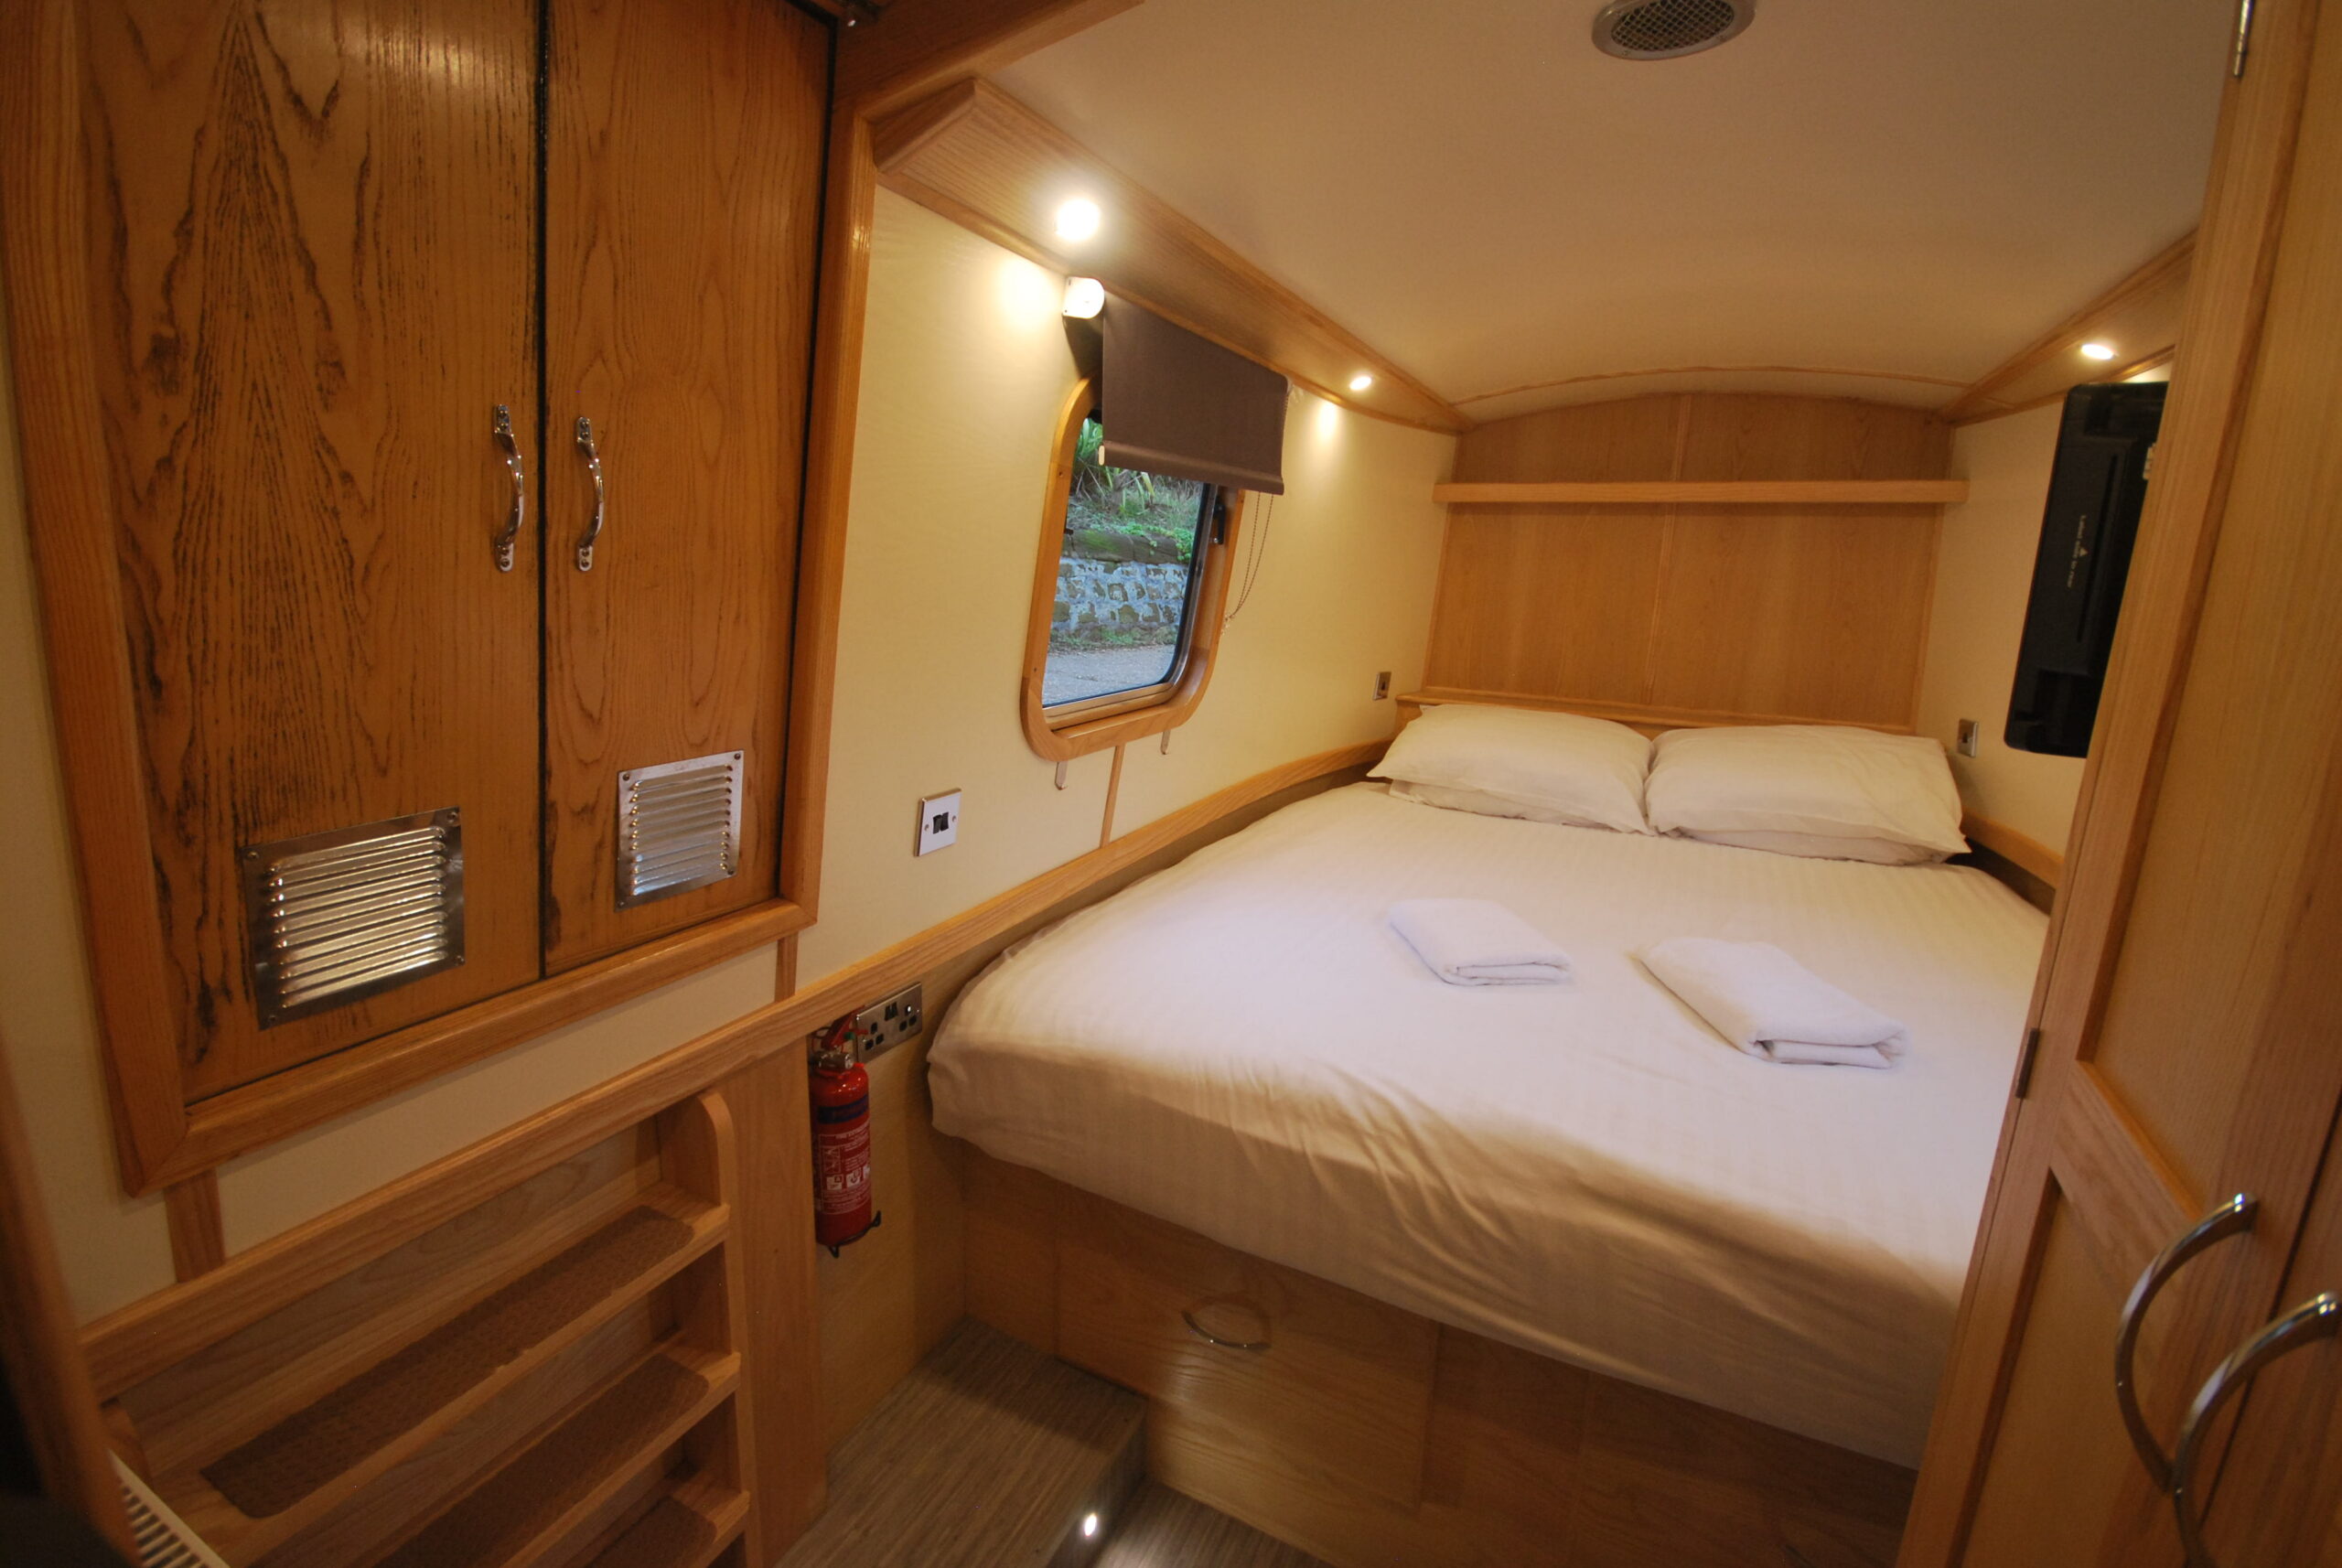 King size bed on a narrow canal boat